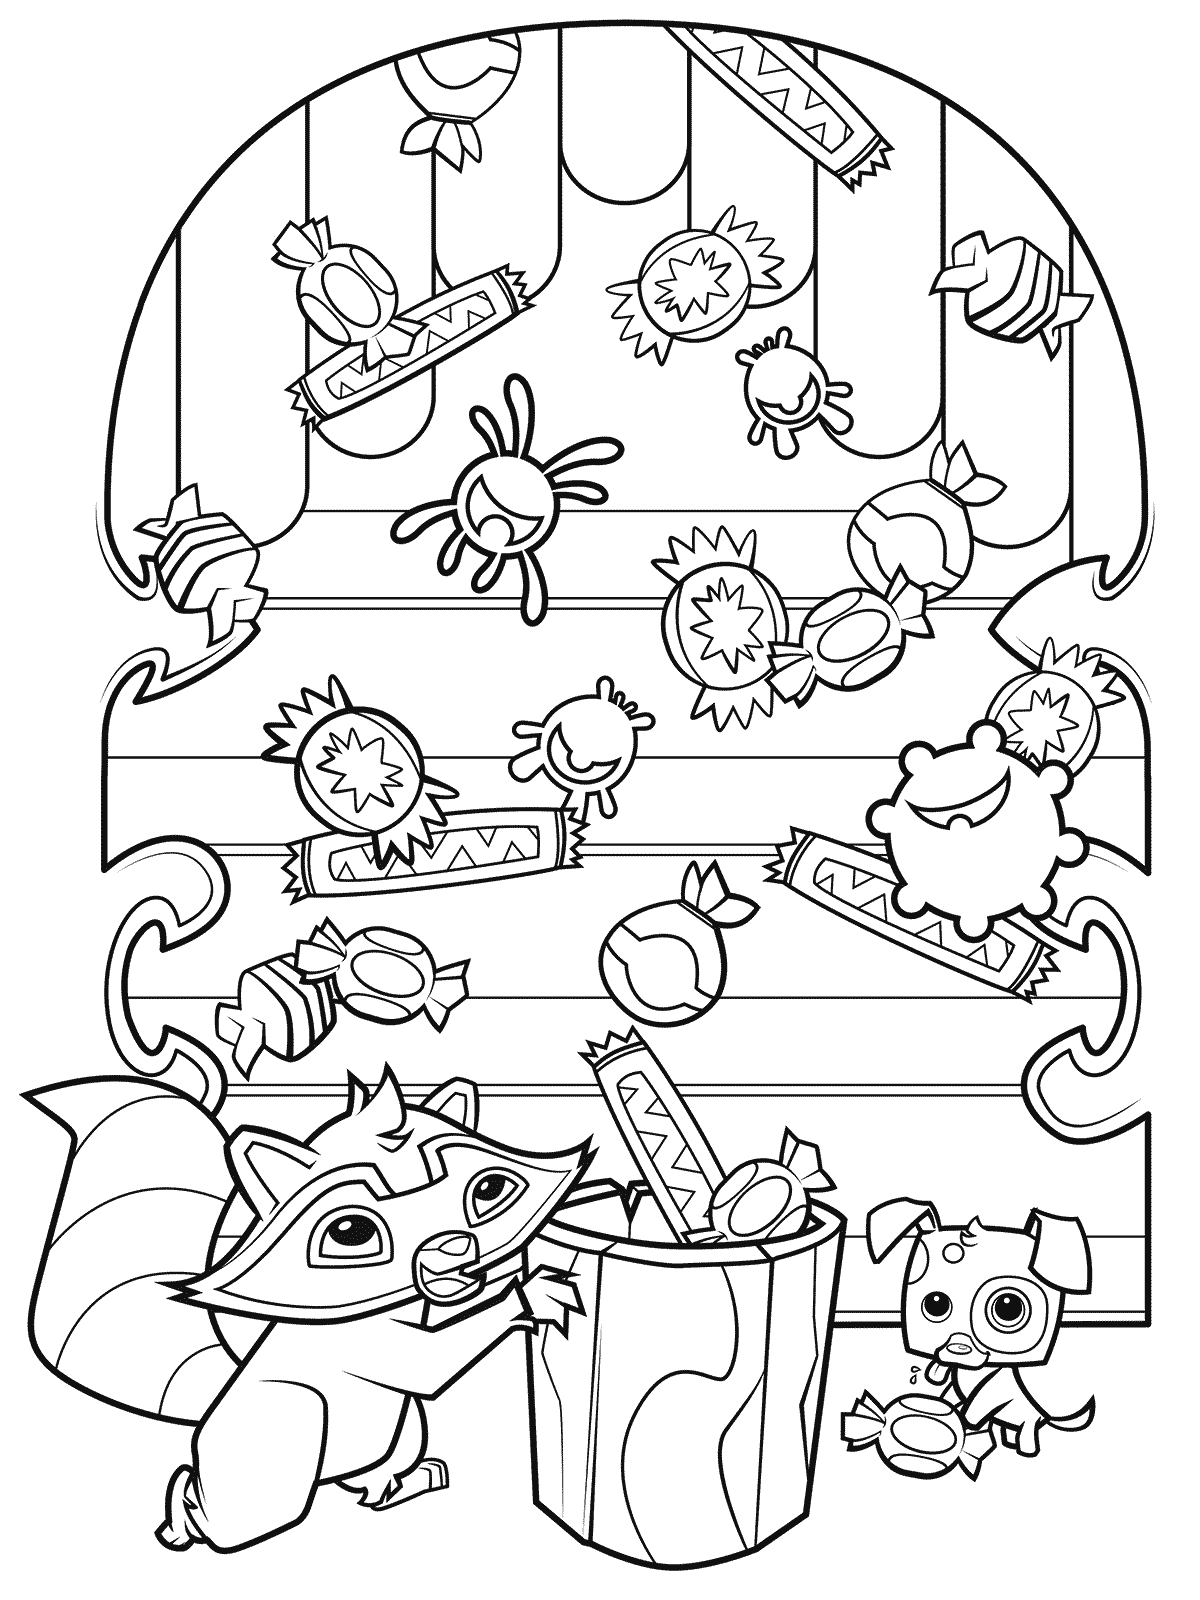 Animal Jam Arrange In Order Coloring Pages   Coloring Cool